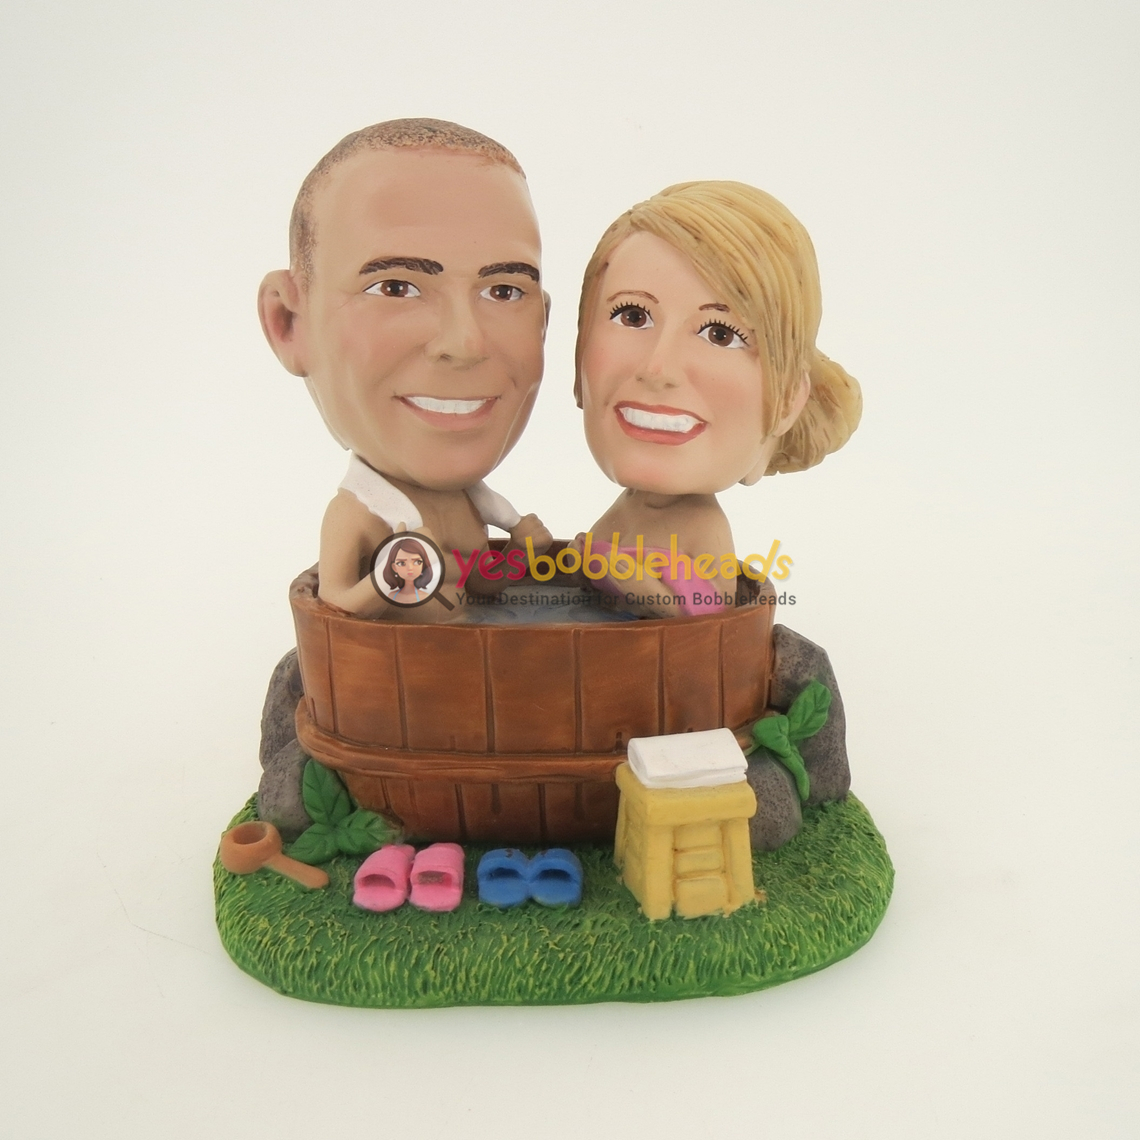 Picture of Custom Bobblehead Doll: Happily Bathing Couple